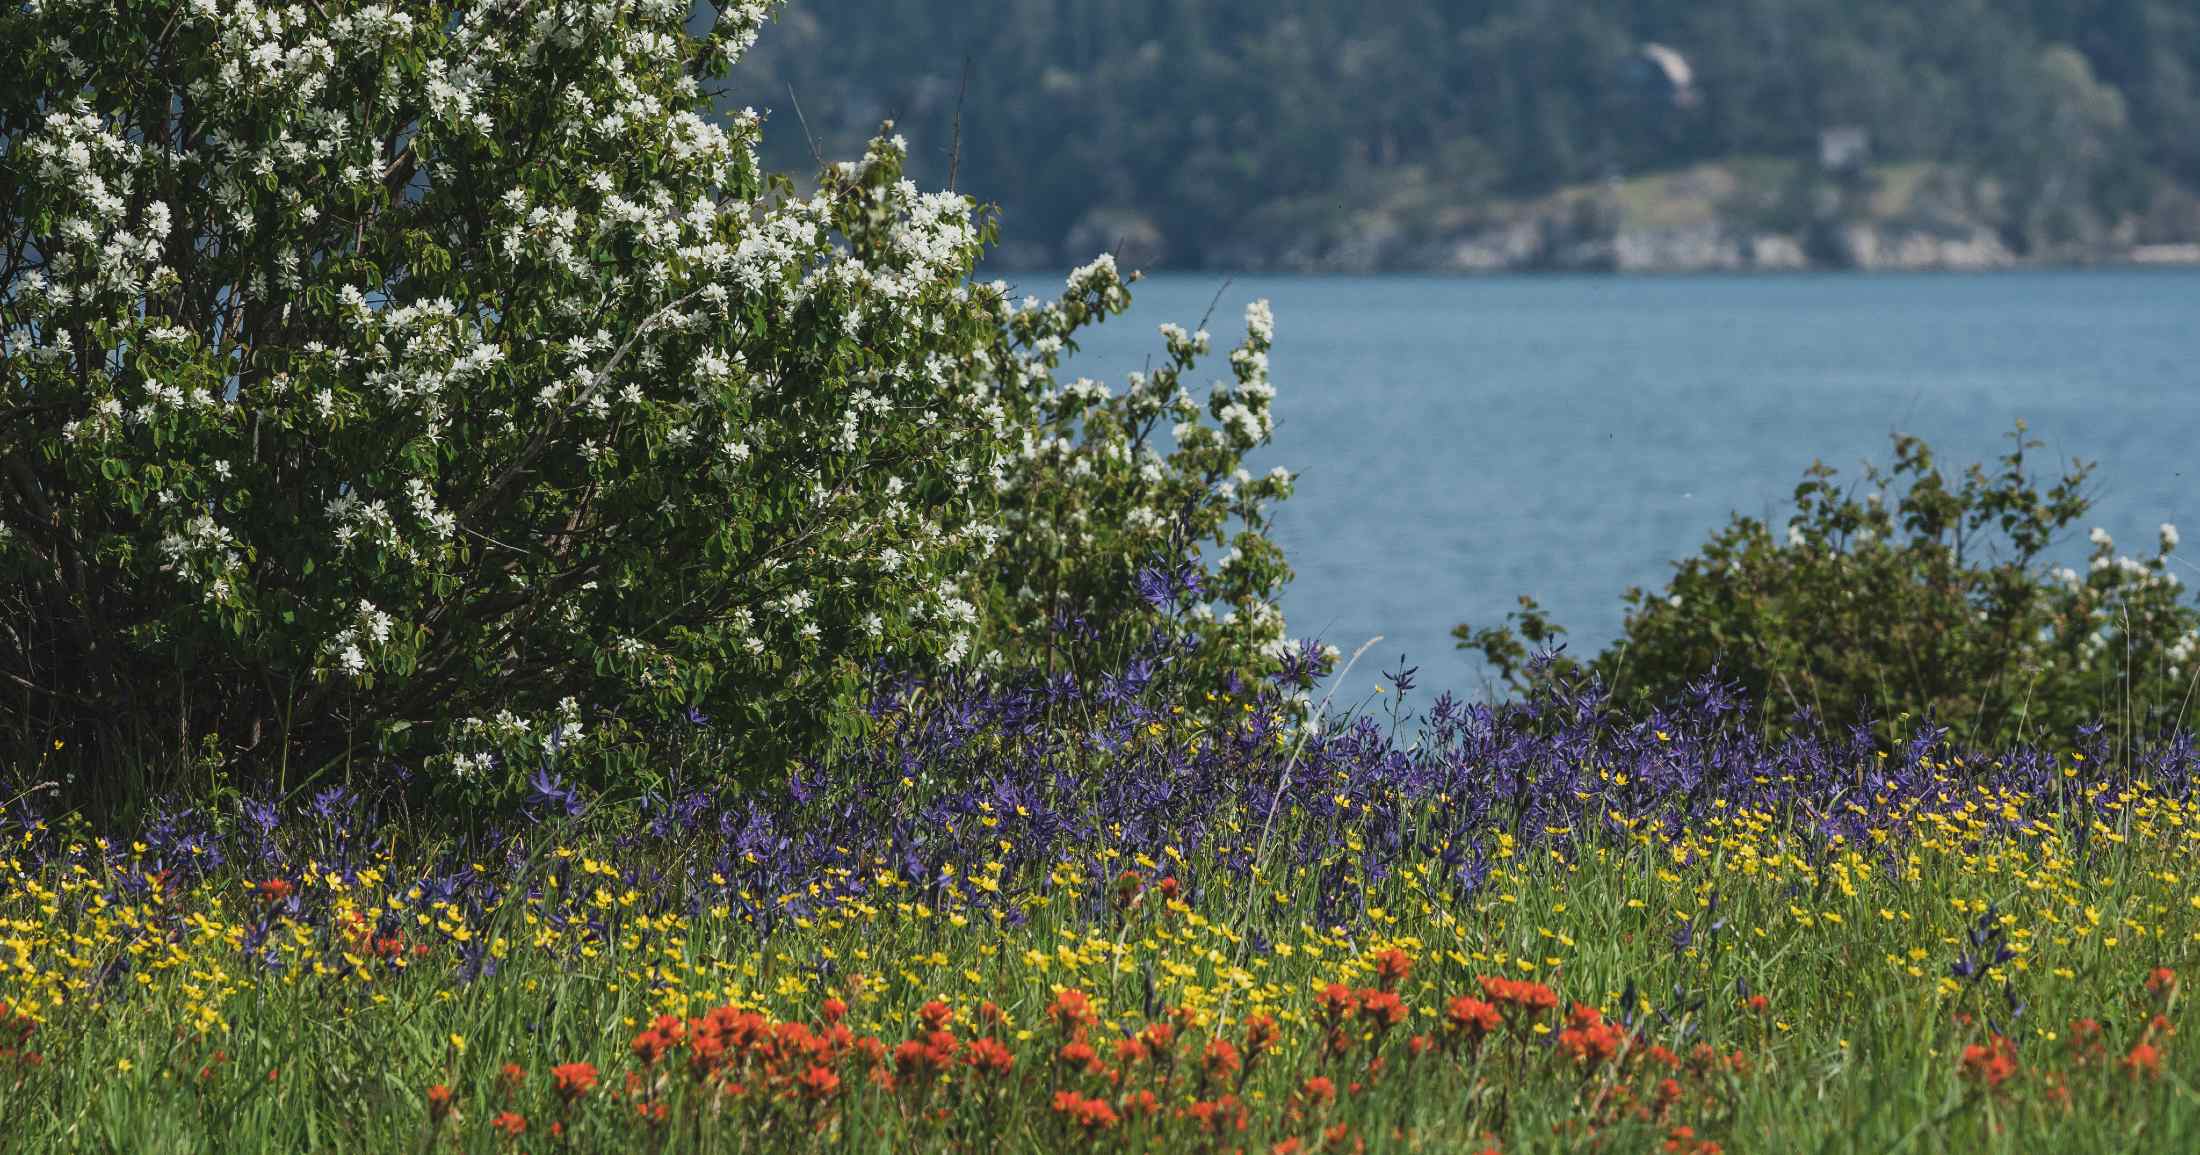 A field of colourful flowers along the coast.